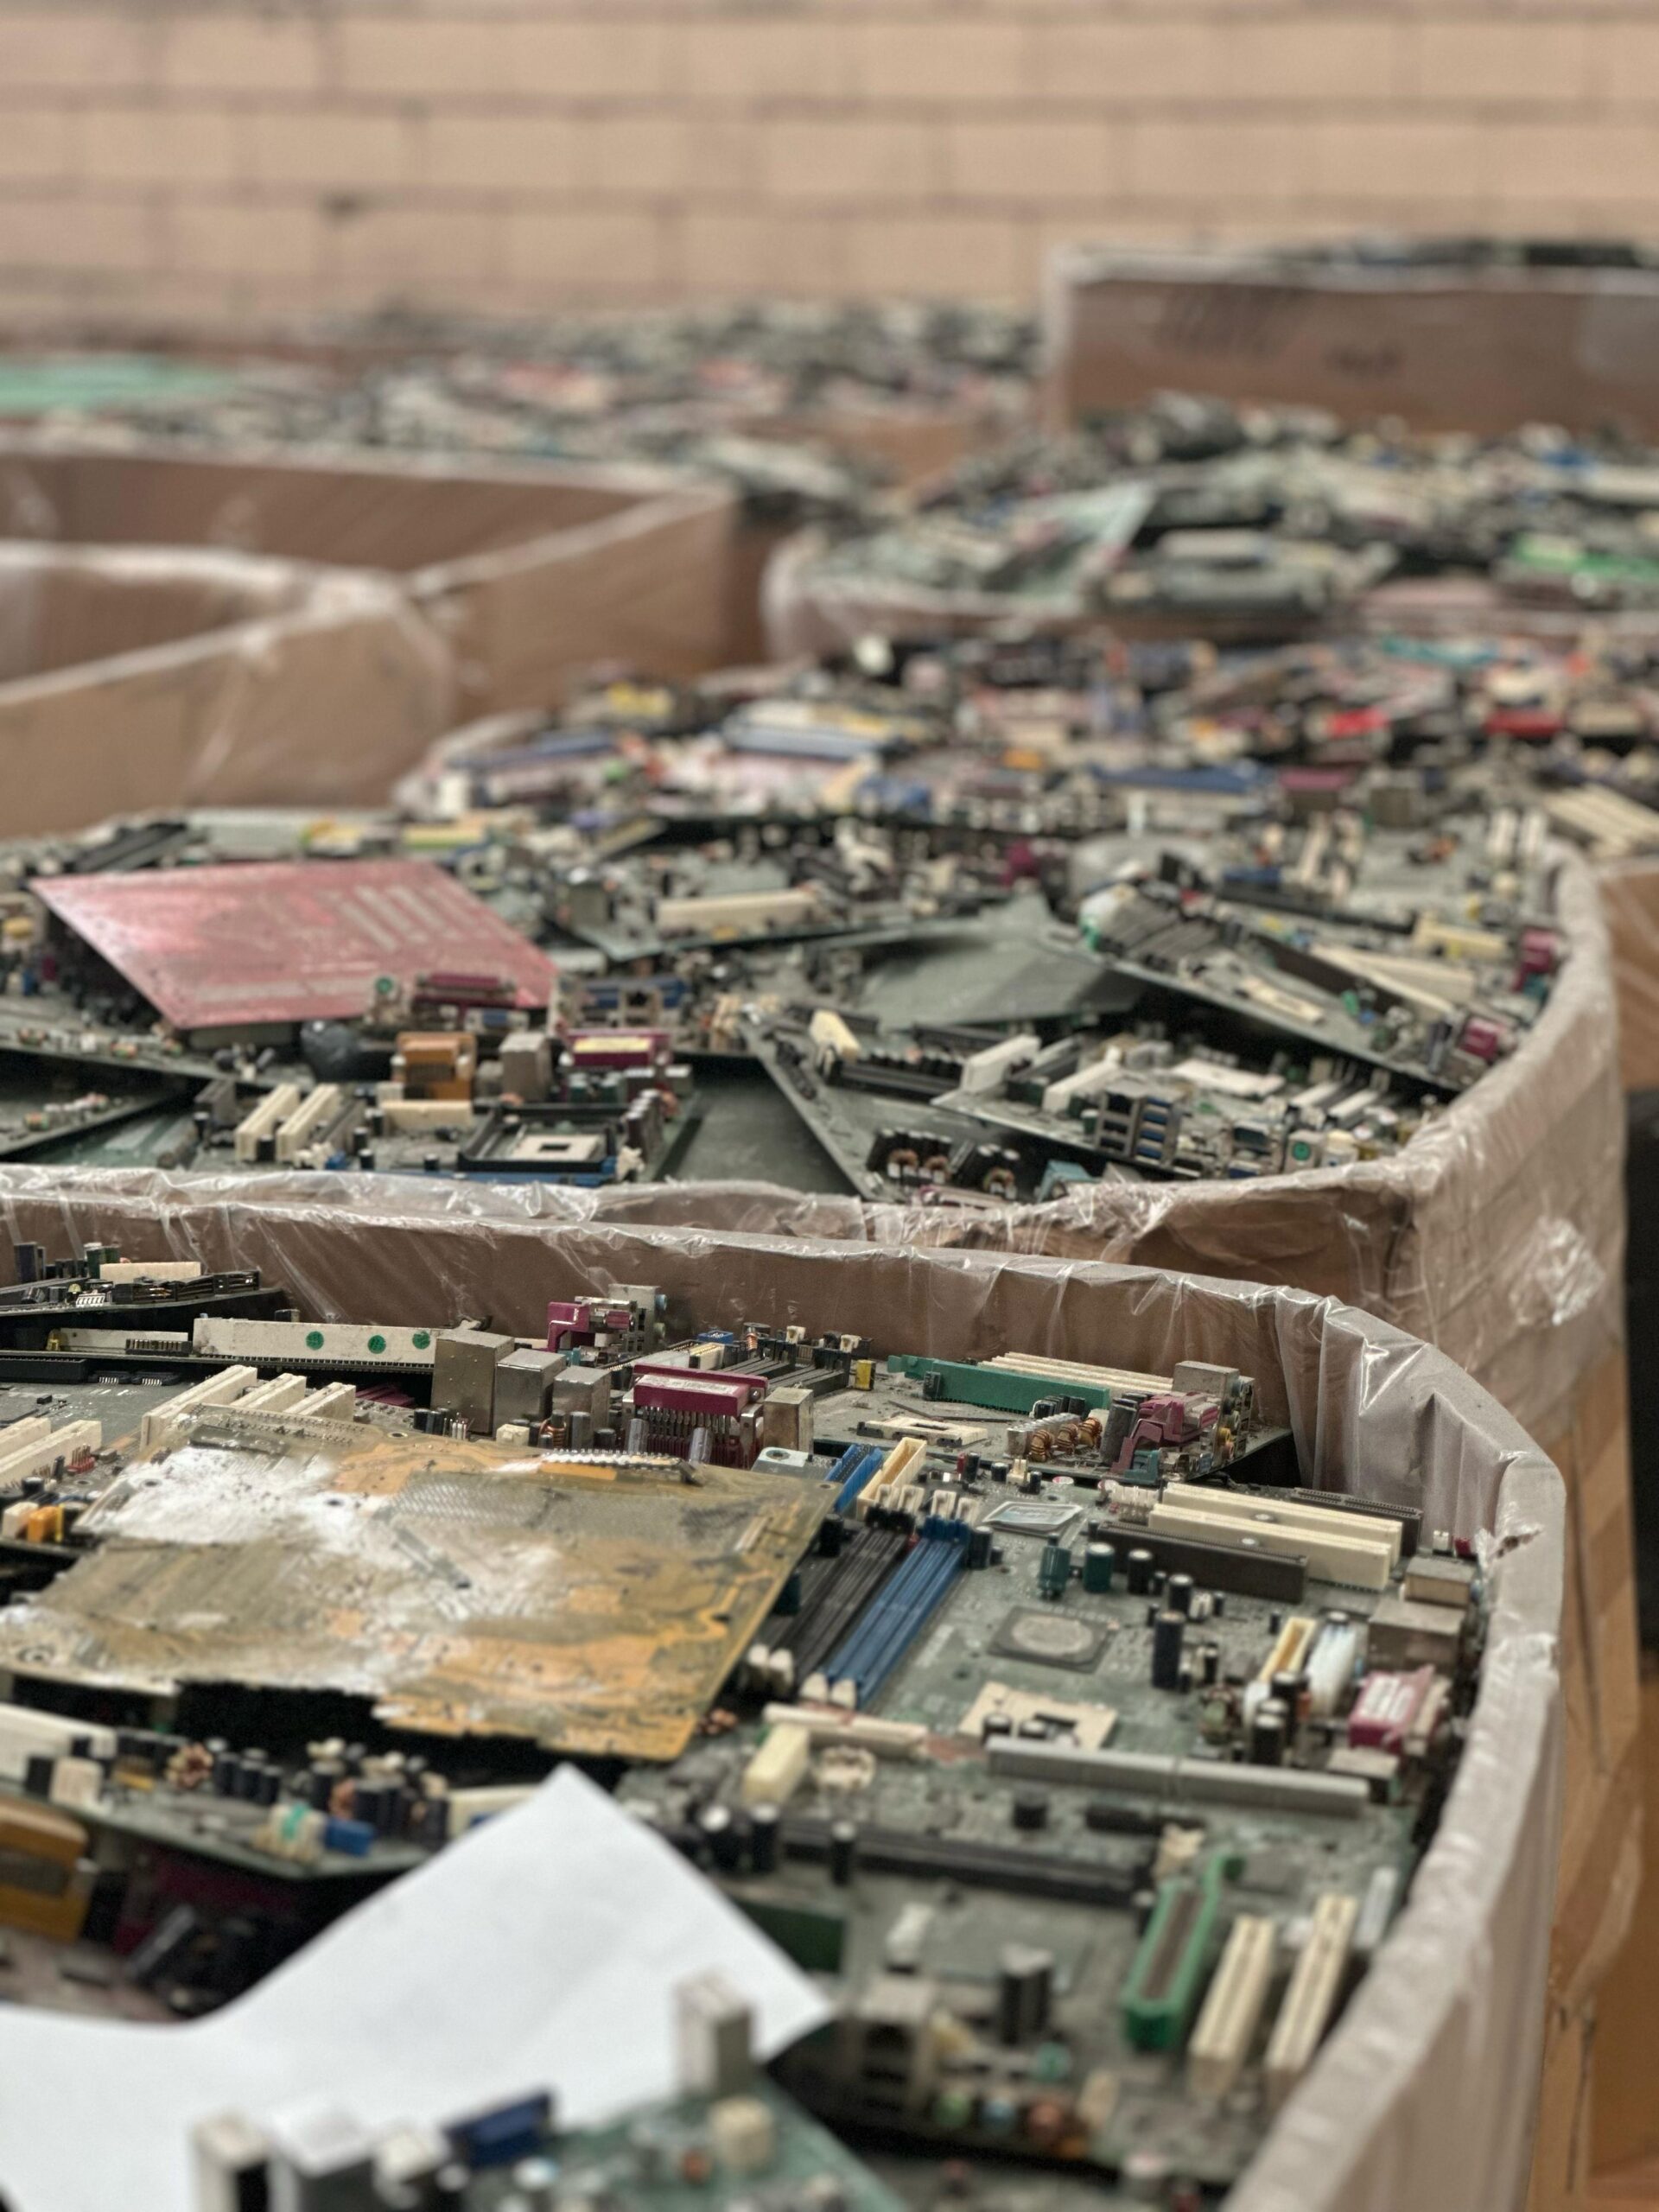 A pile of discarded computer motherboards in a warehouse.